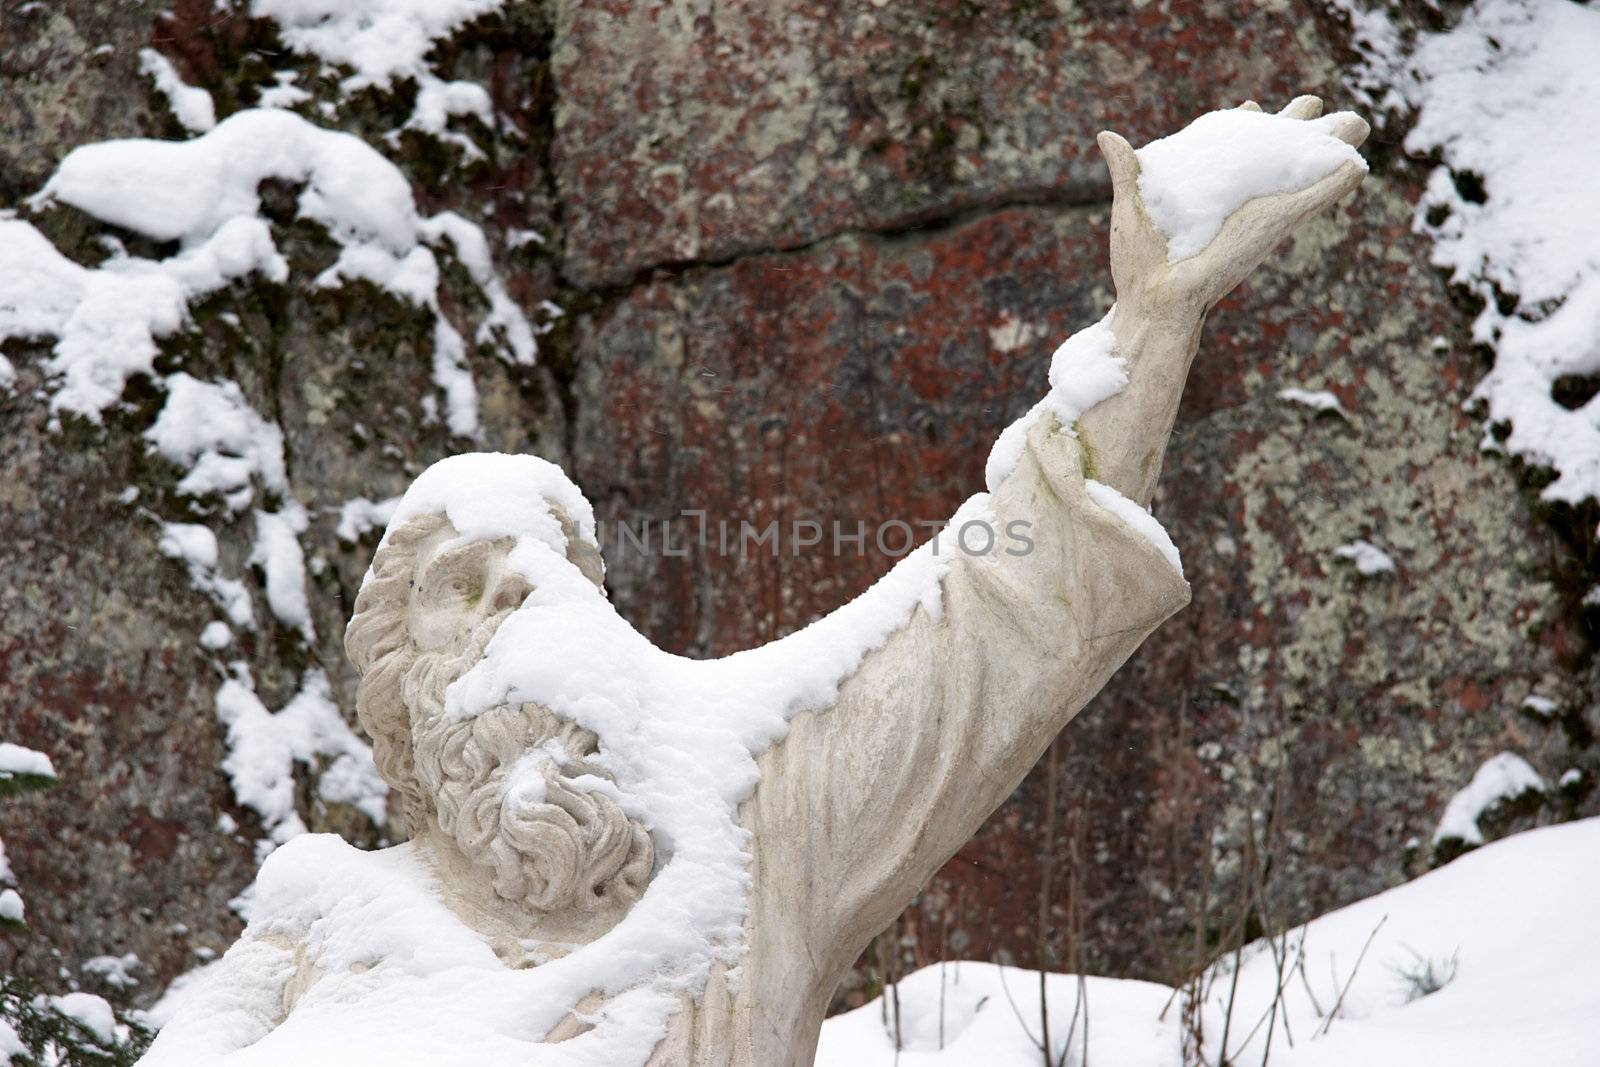 Statue of Vainamoinen, the central character from Finnish national epic Kalevala. The statue is located in Mon Repos landscaped park near Saint Petersburg.